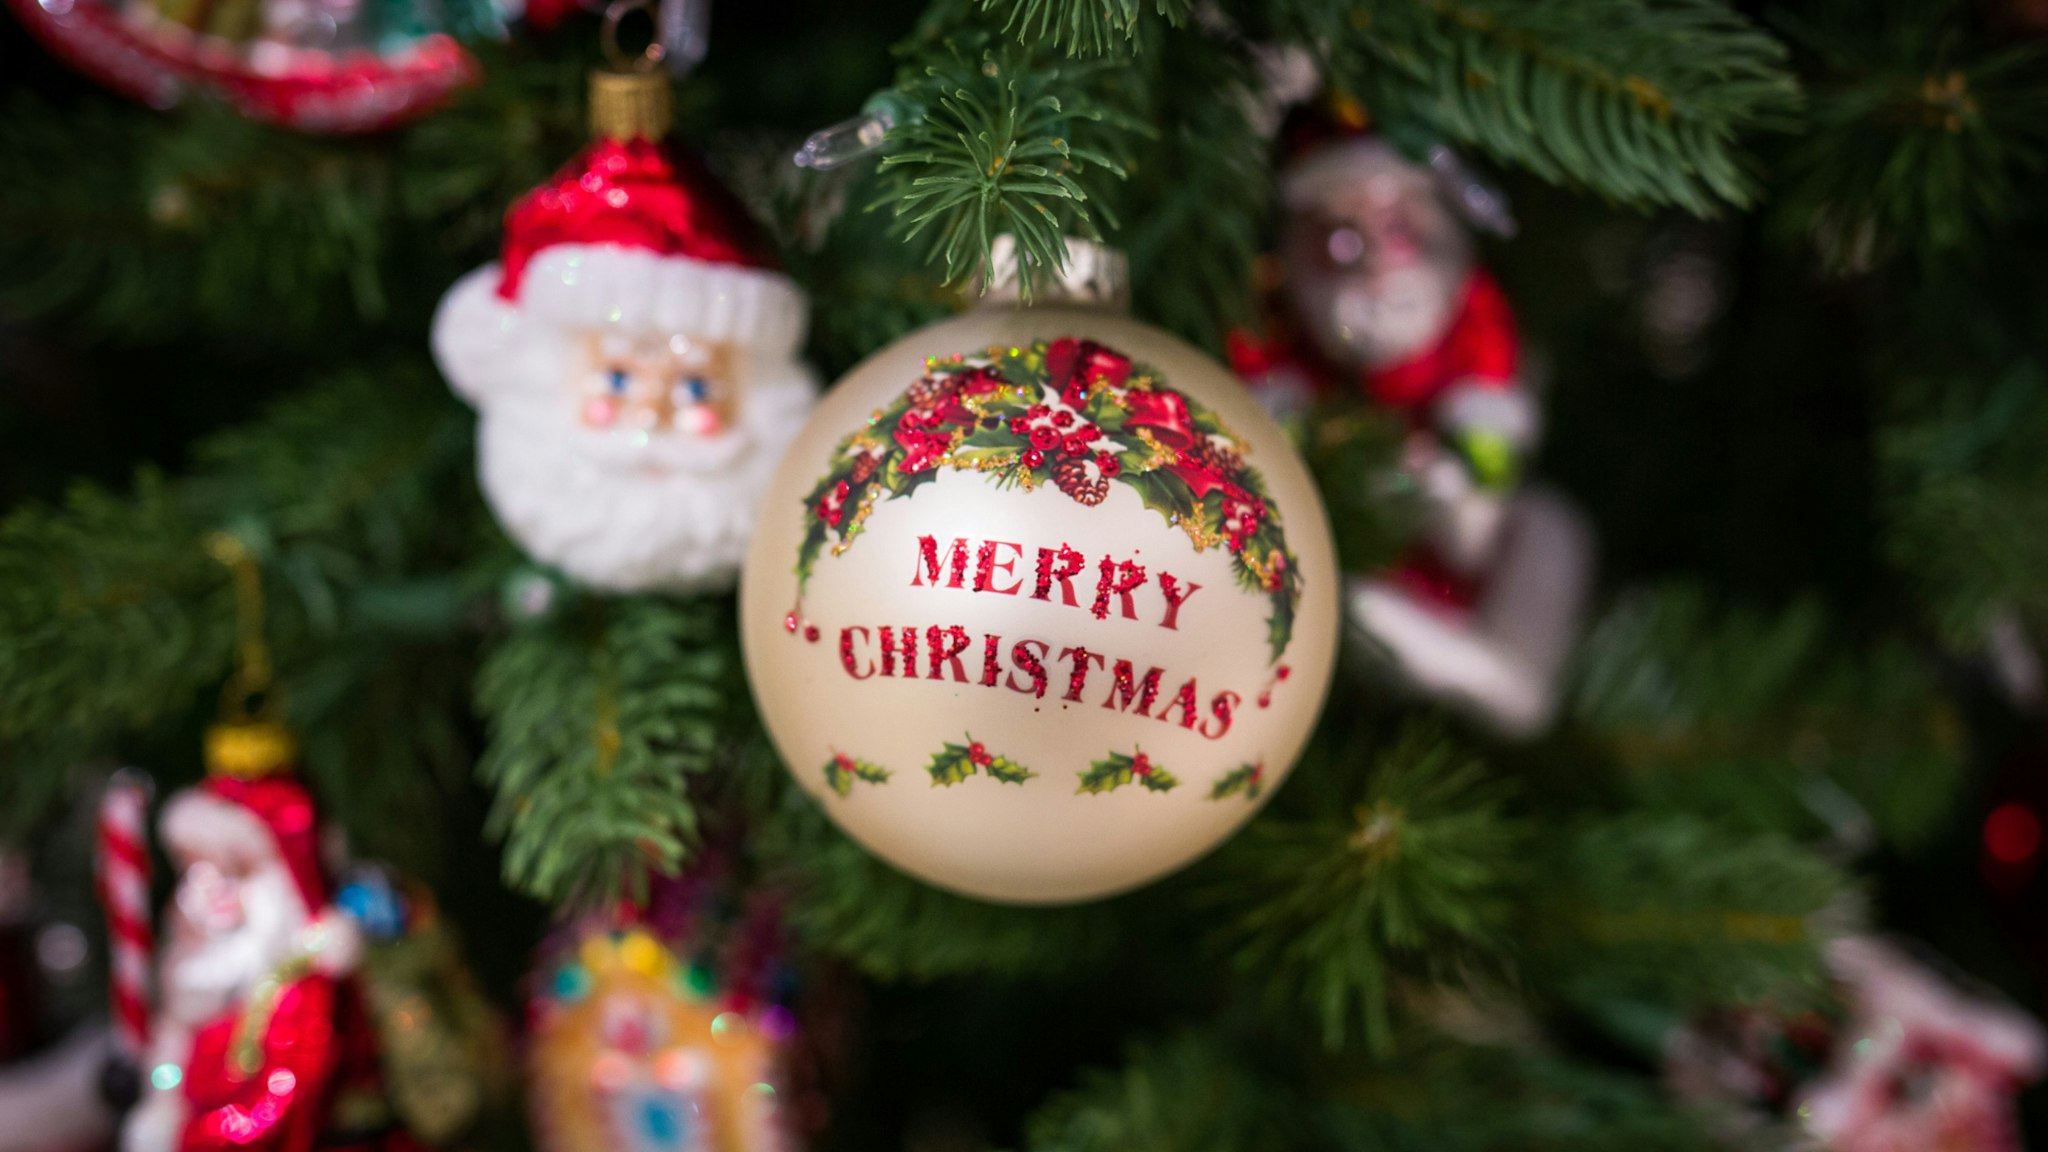 A bauble emblazoned with Merry Christmas hangs from a Christmas tree on display during the opening day of the Christmas Shop in the Selfridges Plc department store in London, U.K., on Monday, Aug. 1, 2016.